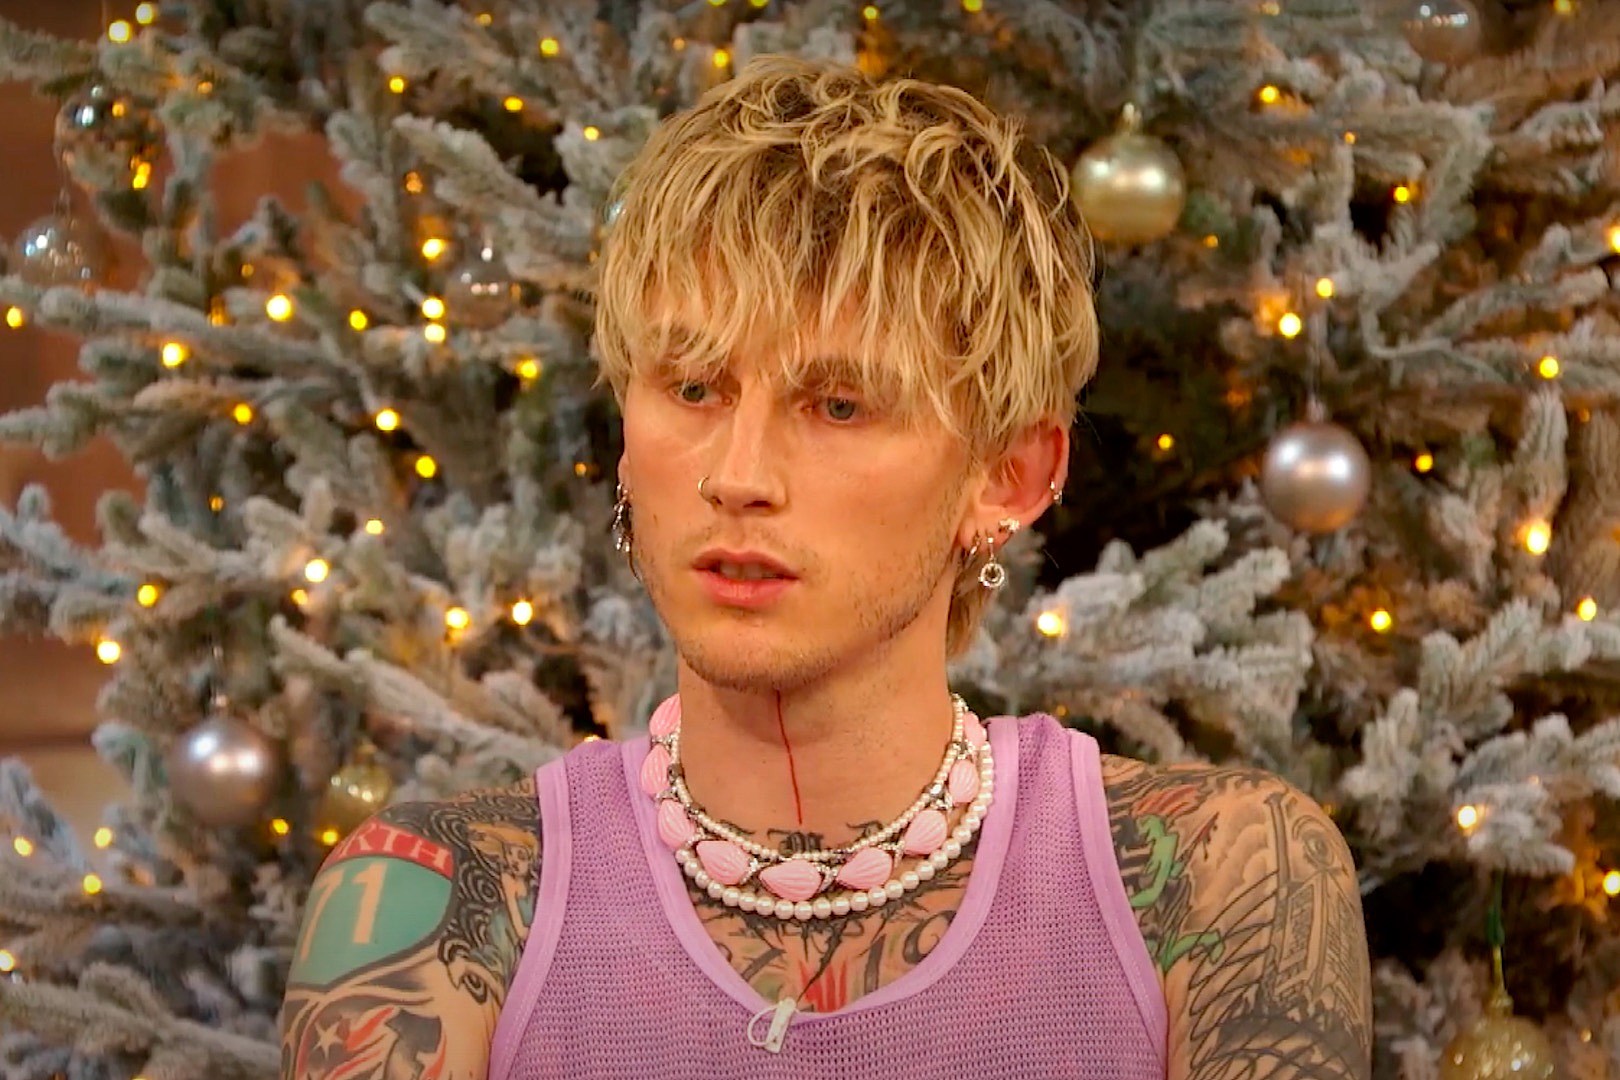 Machine Gun Kelly Opens Up About Emotional Vulnerability on Show